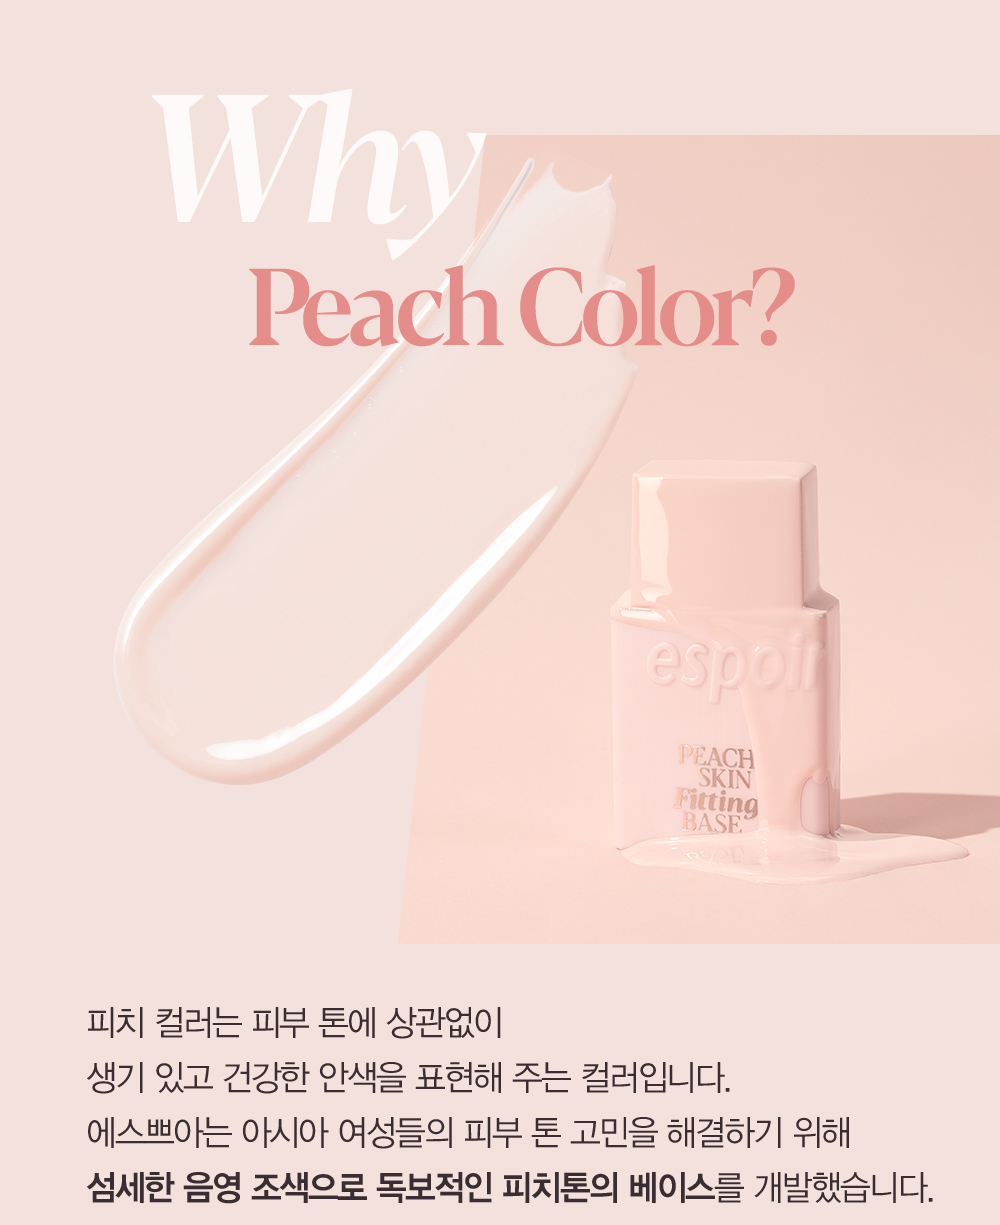 Why Peach Color?